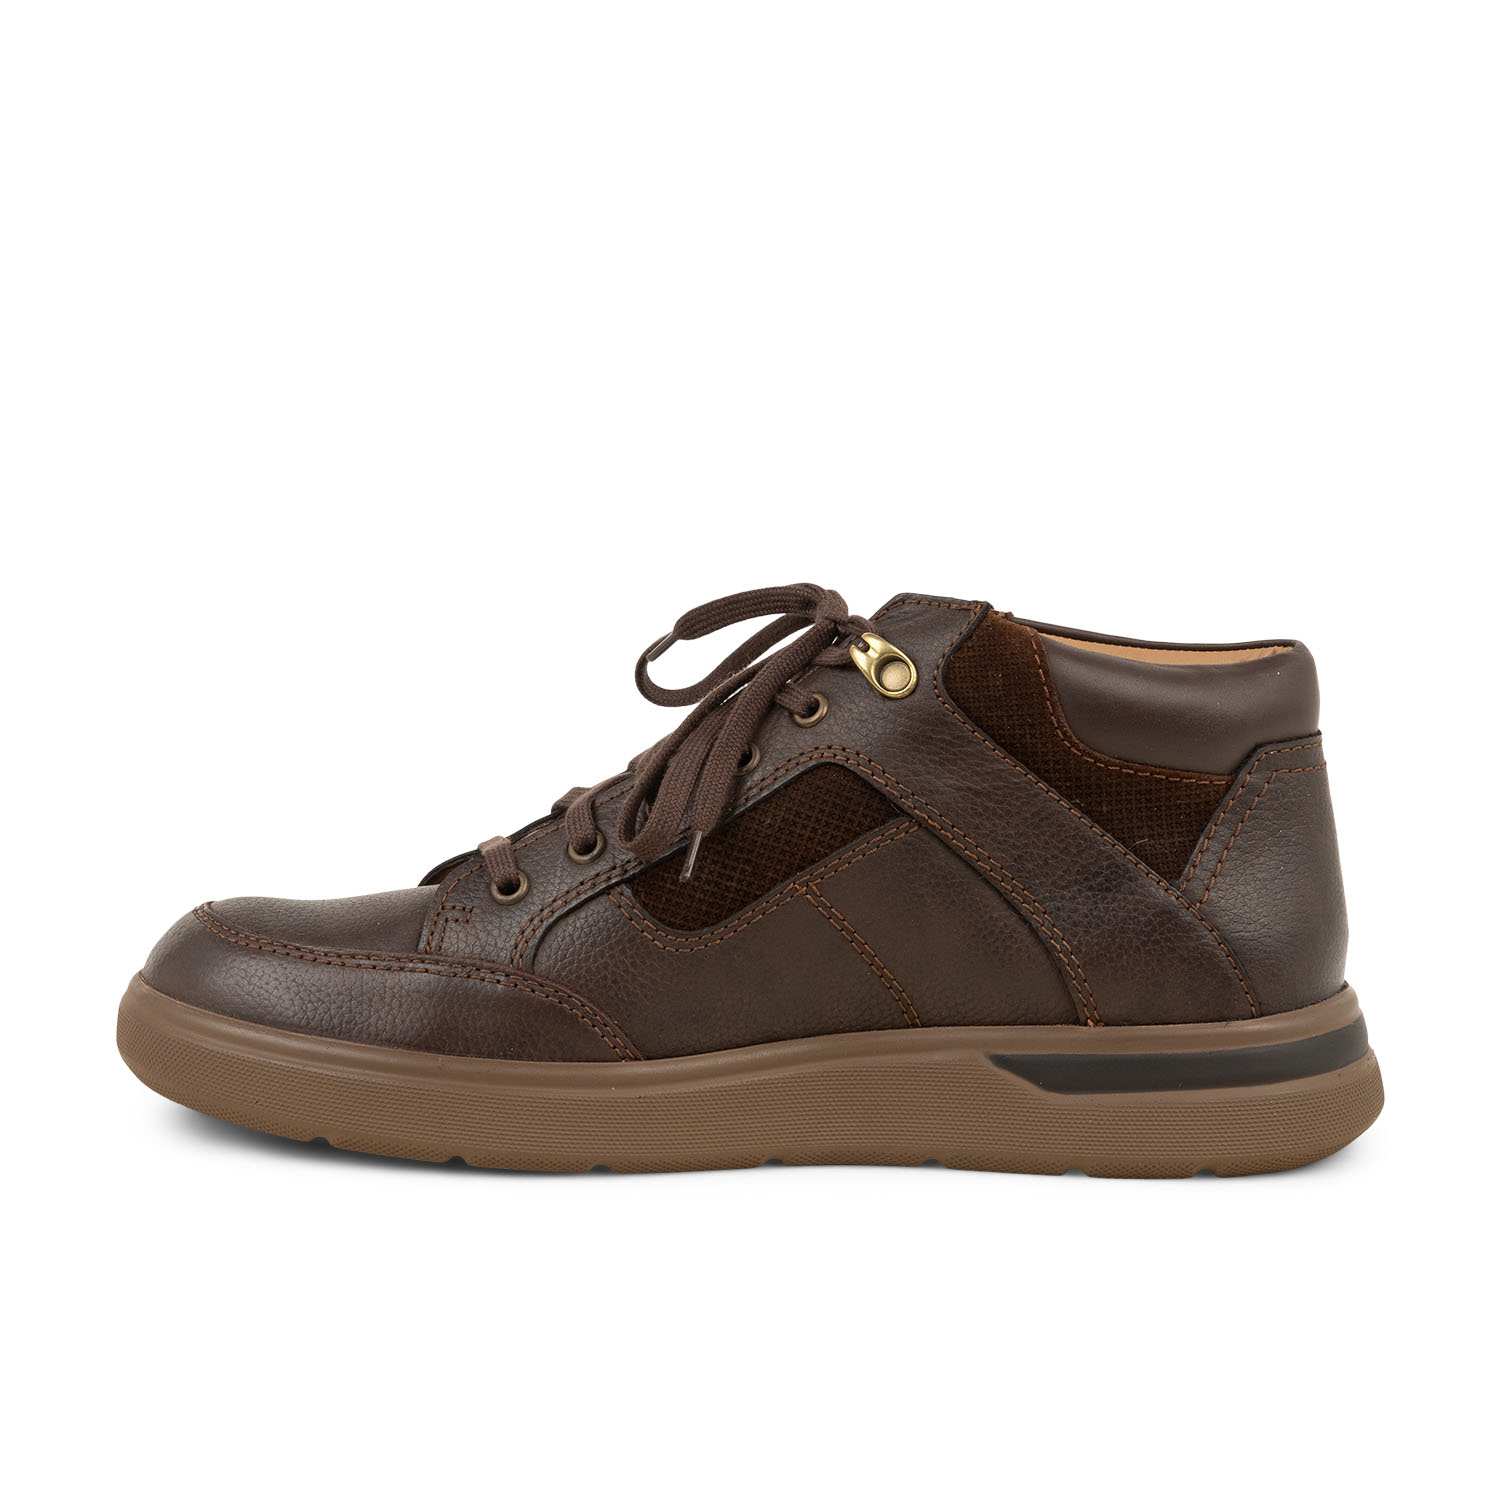 04 - ORTON - MEPHISTO - Chaussures à lacets - Cuir